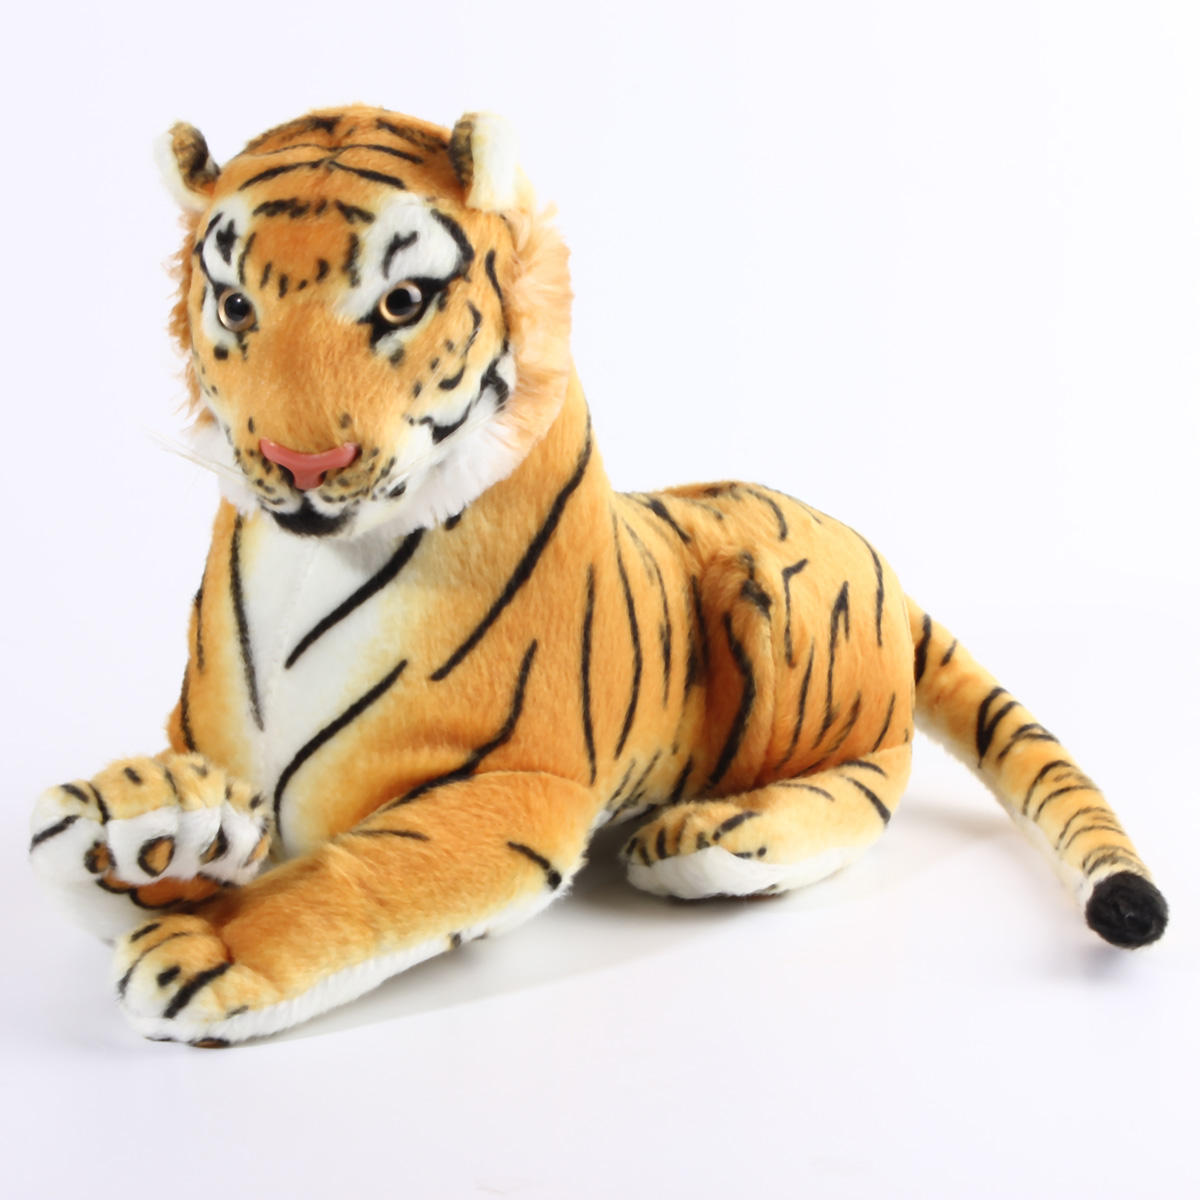 The White Tiger NEW Soft Plush Cotton Stuffed Animal Cute Toy Doll For Kids